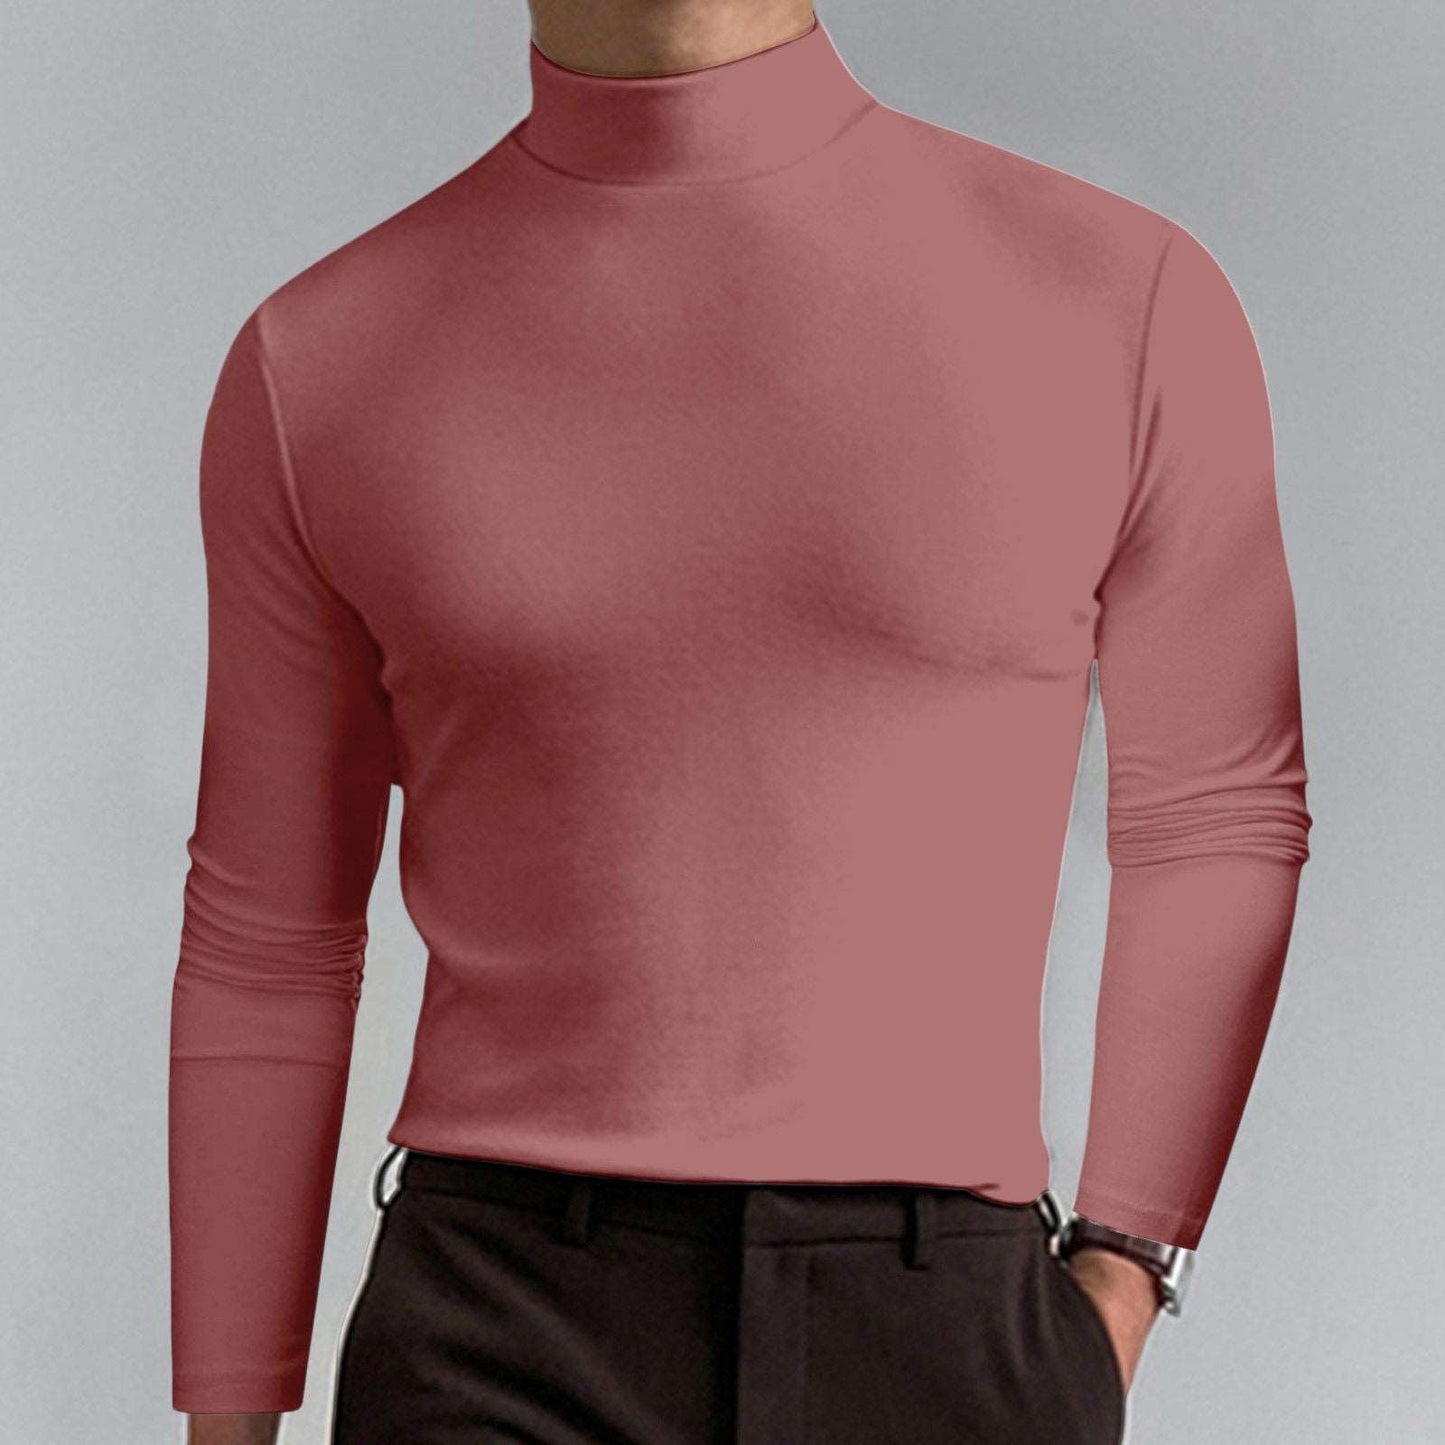 Autumn And Winter High Neck Long Sleeve T-shirt Men's Base Comfortable Solid Color Top